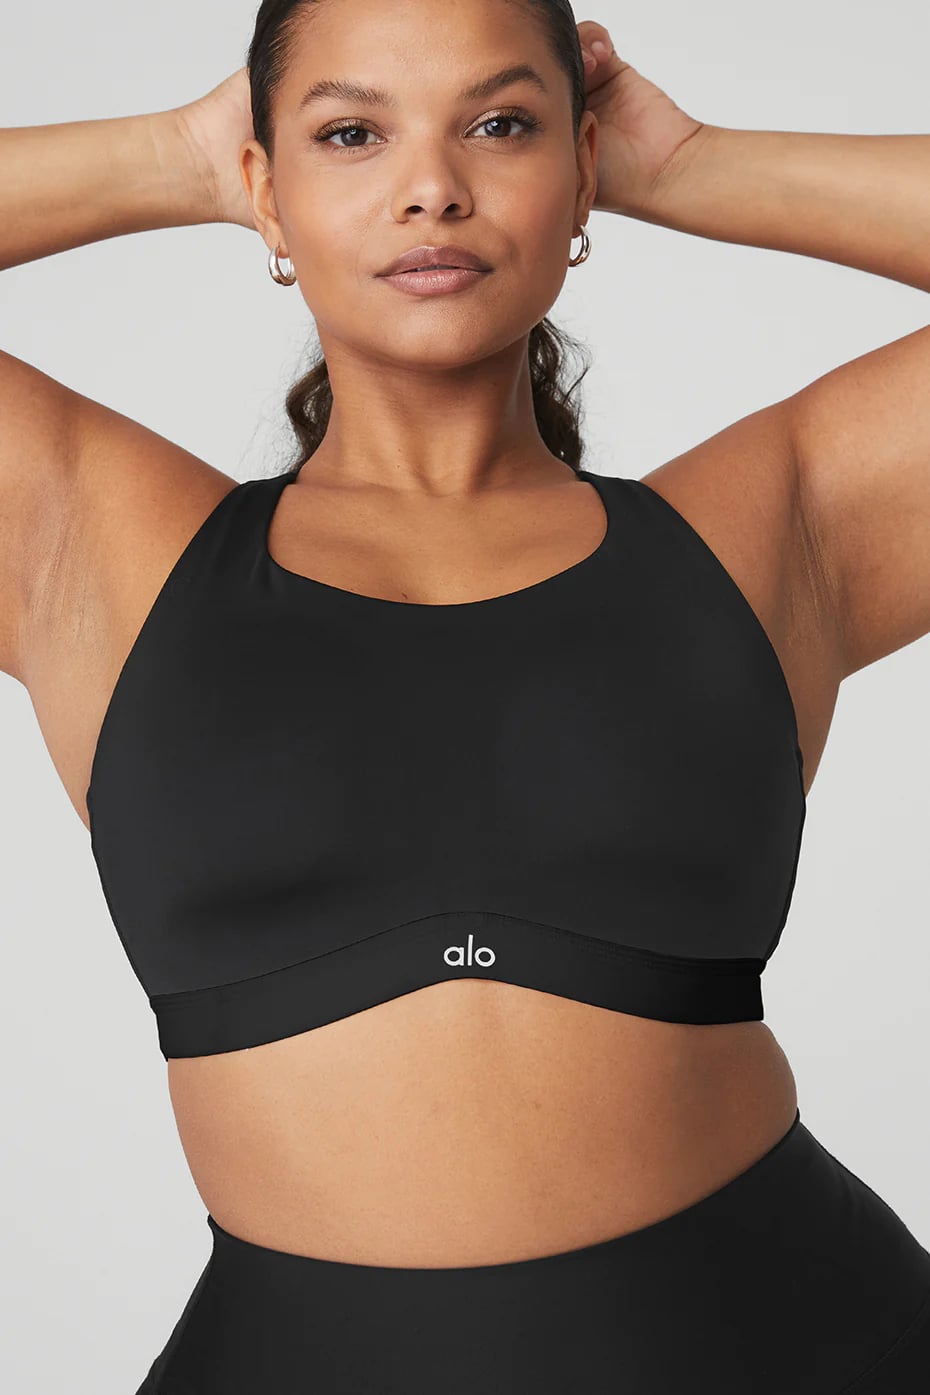 The Bestselling Workout Clothes From Alo Yoga